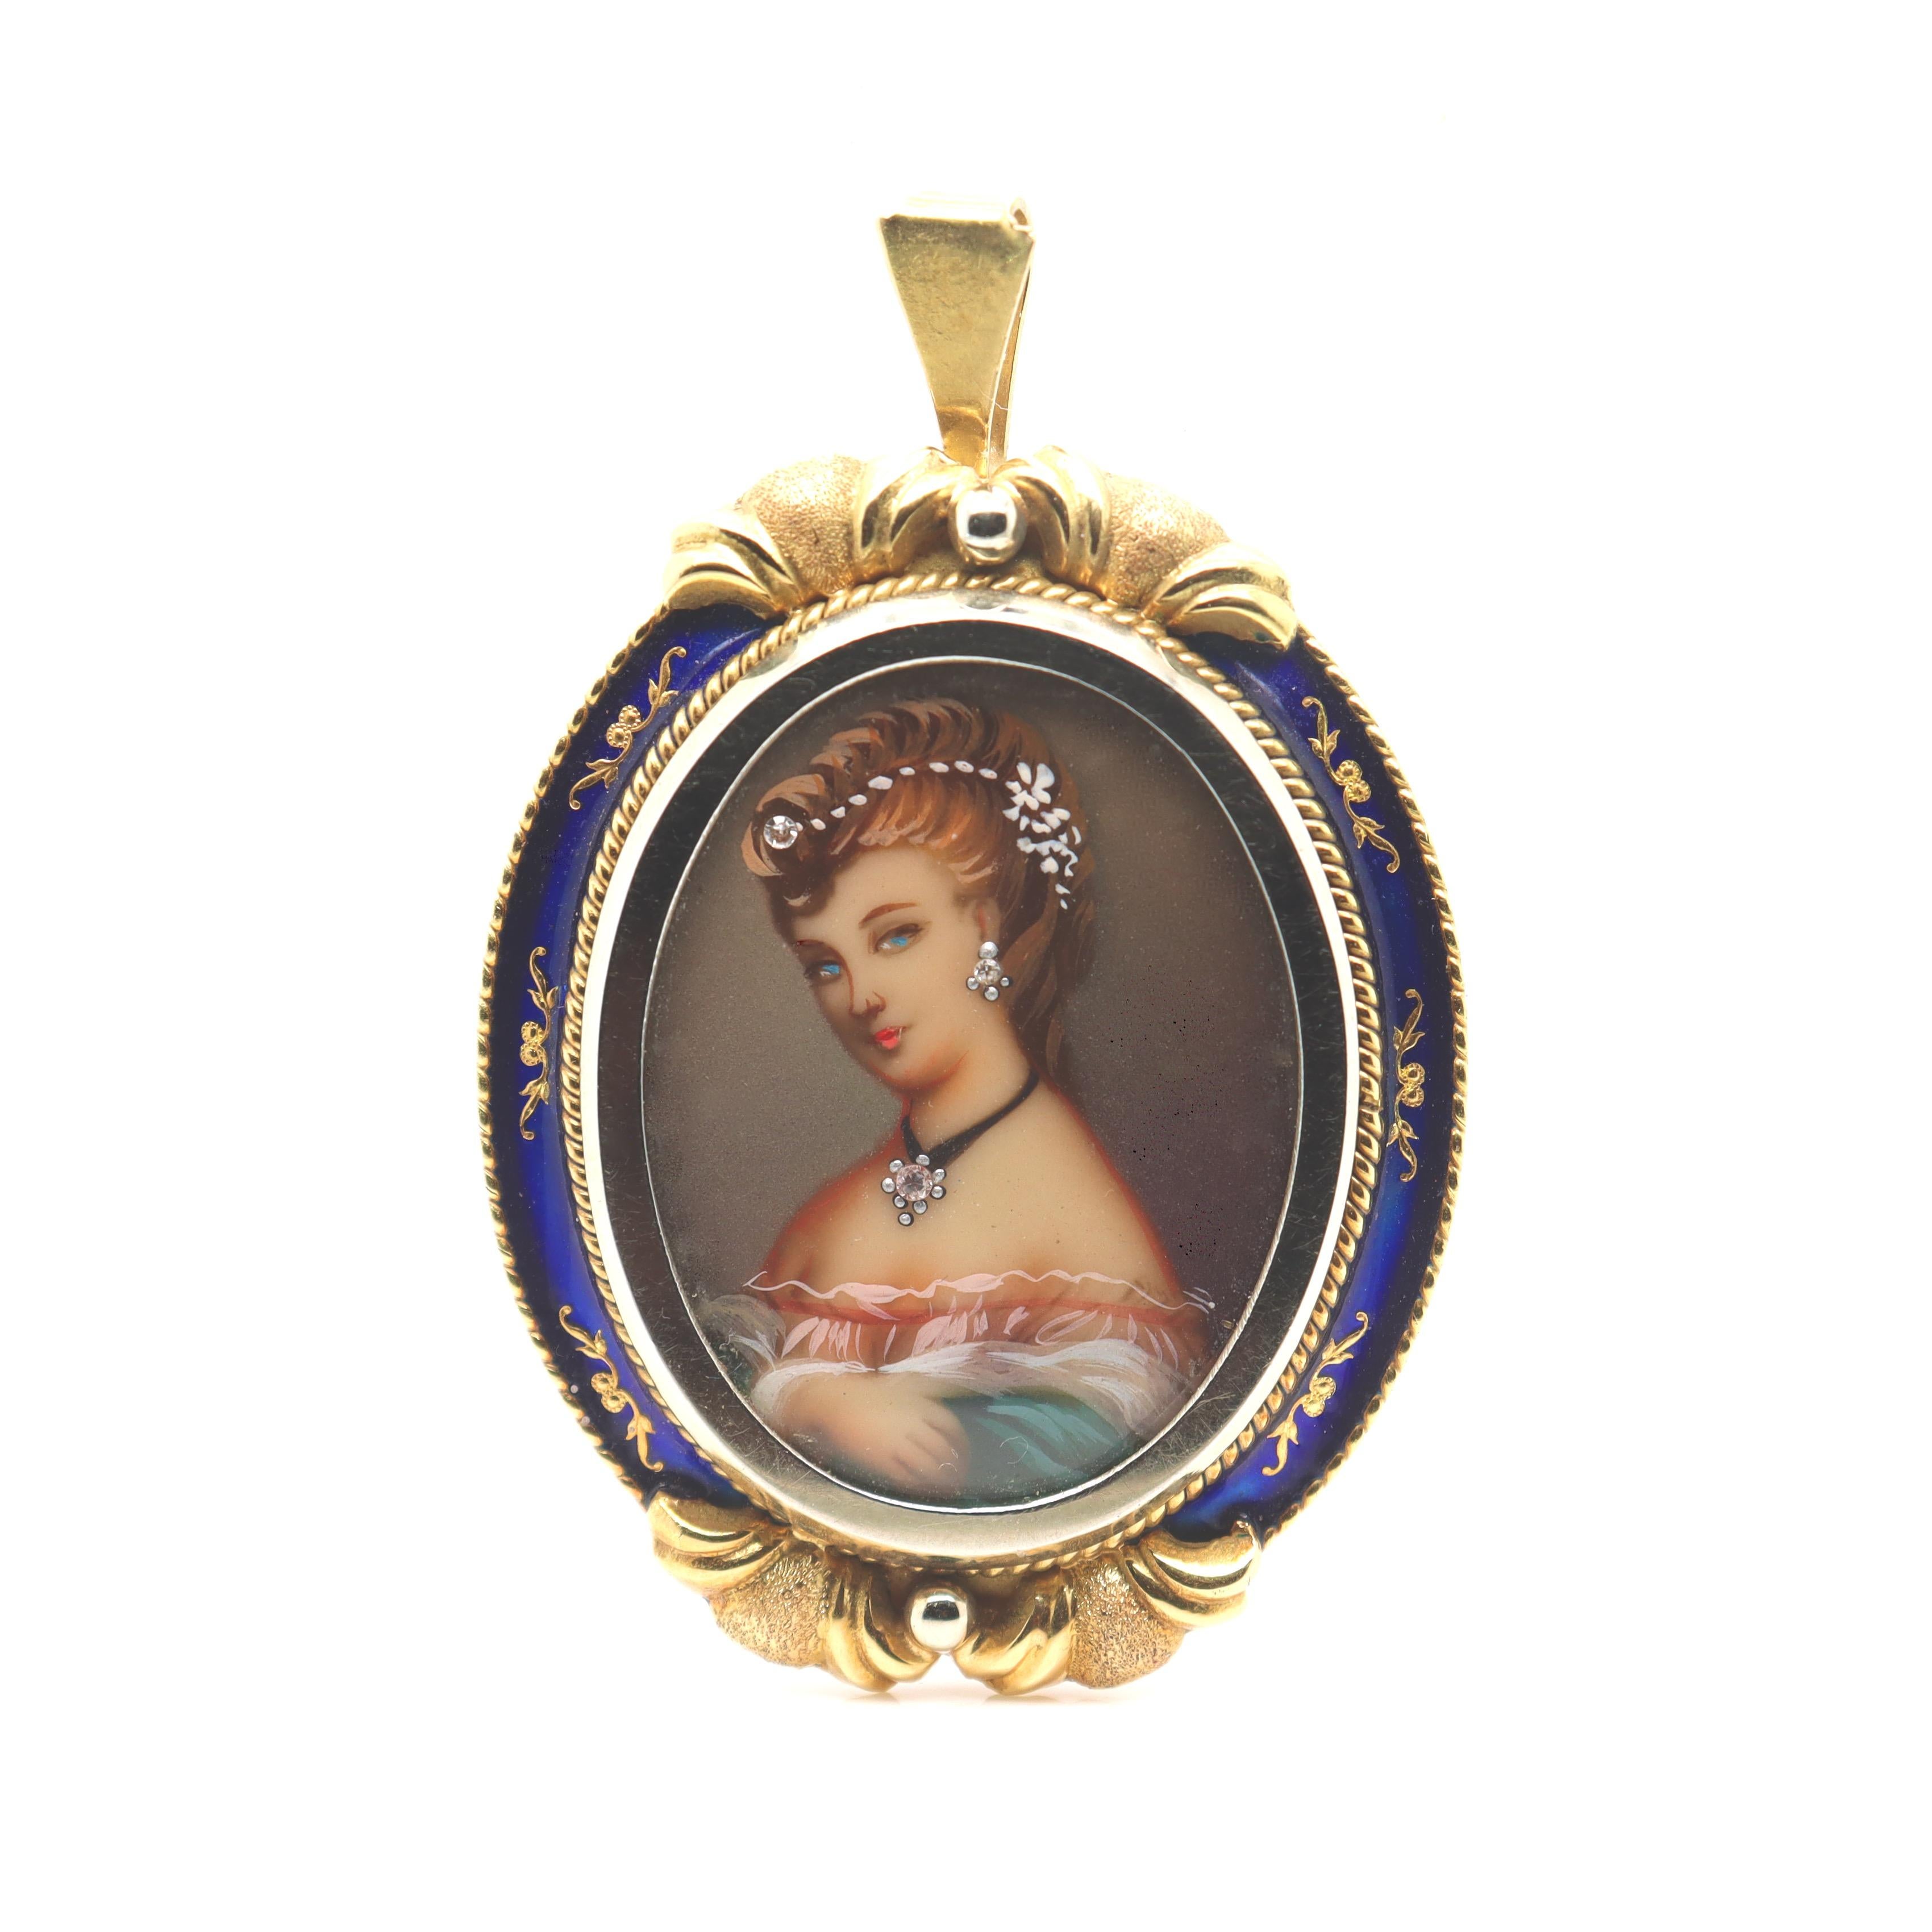 A fine miniature portrait convertible brooch & pendant.

By Oreste Giovanni Corletto.

In 18k yellow gold with a cobalt blue enamel border.

The portrait miniature depicts a fine Victorian lady in 3/4 profile. She is adorned with what appear to be 3